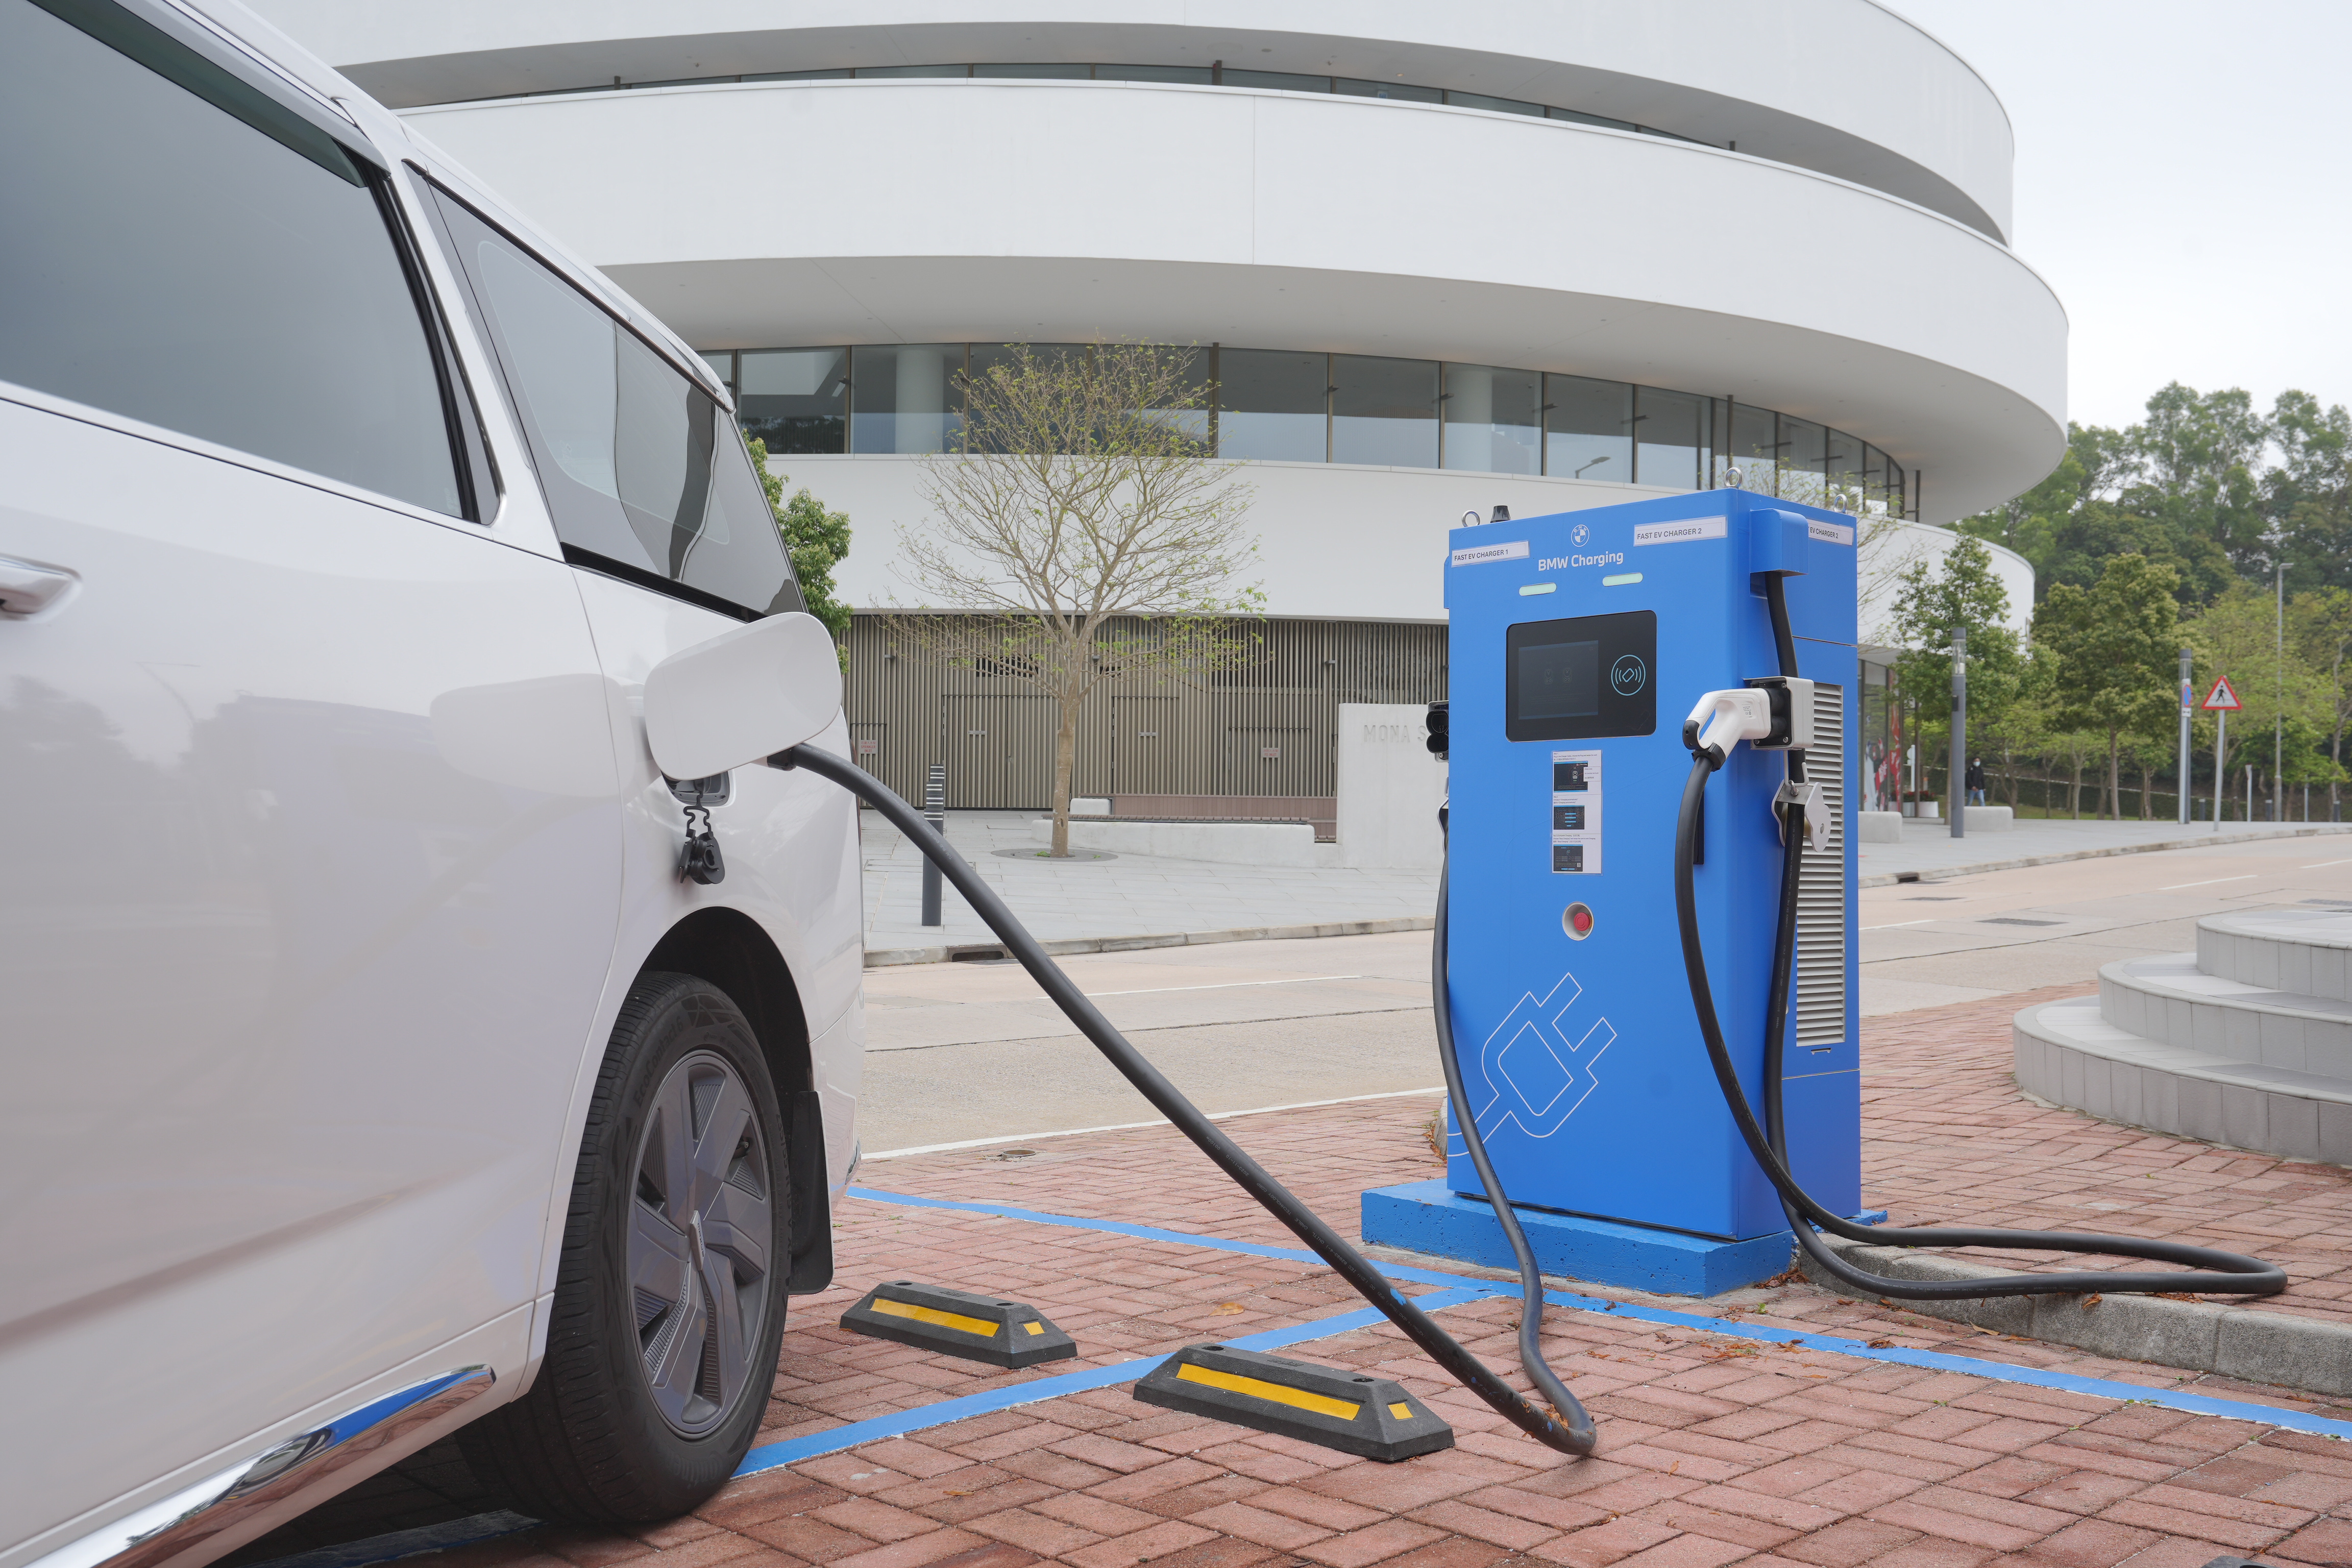 HKUST will continue to electrify its fleet of vehicles based on operational needs and market conditions. By April of 2024, over 30% of the University’s fleet are EVs.